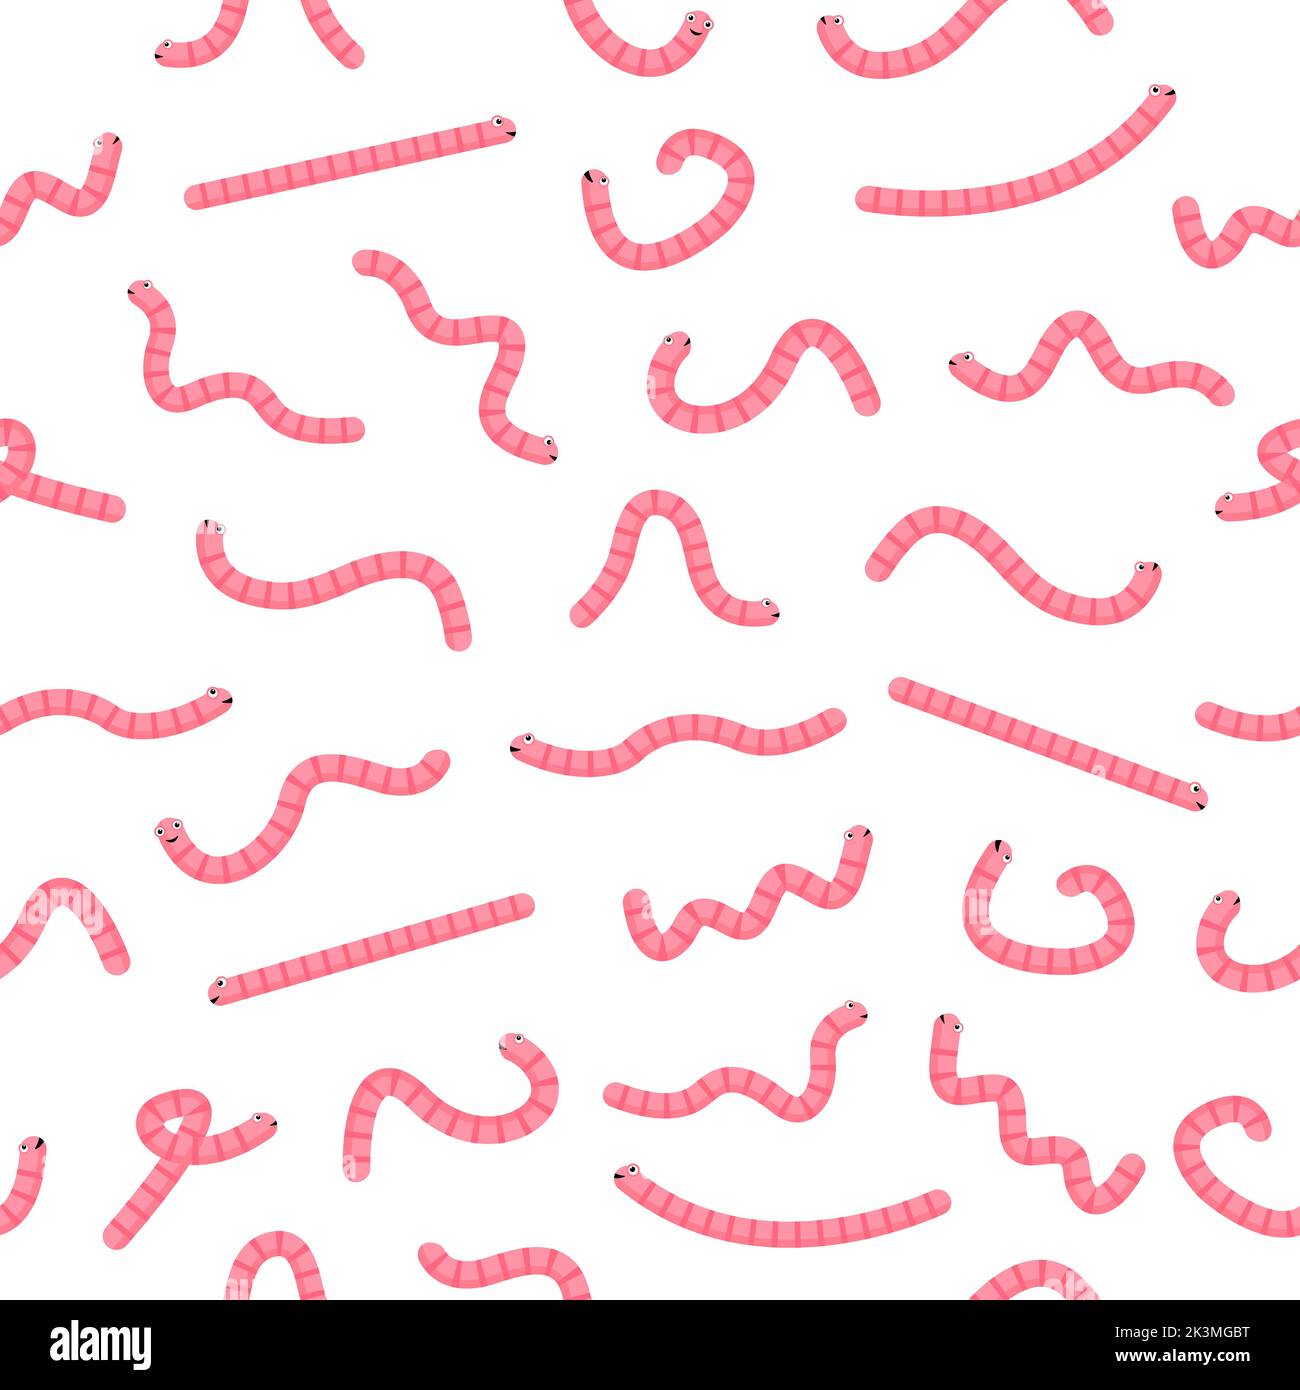 Worms character seamless pattern. Pink earthworm collection. Vector isolated on white. Stock Vector